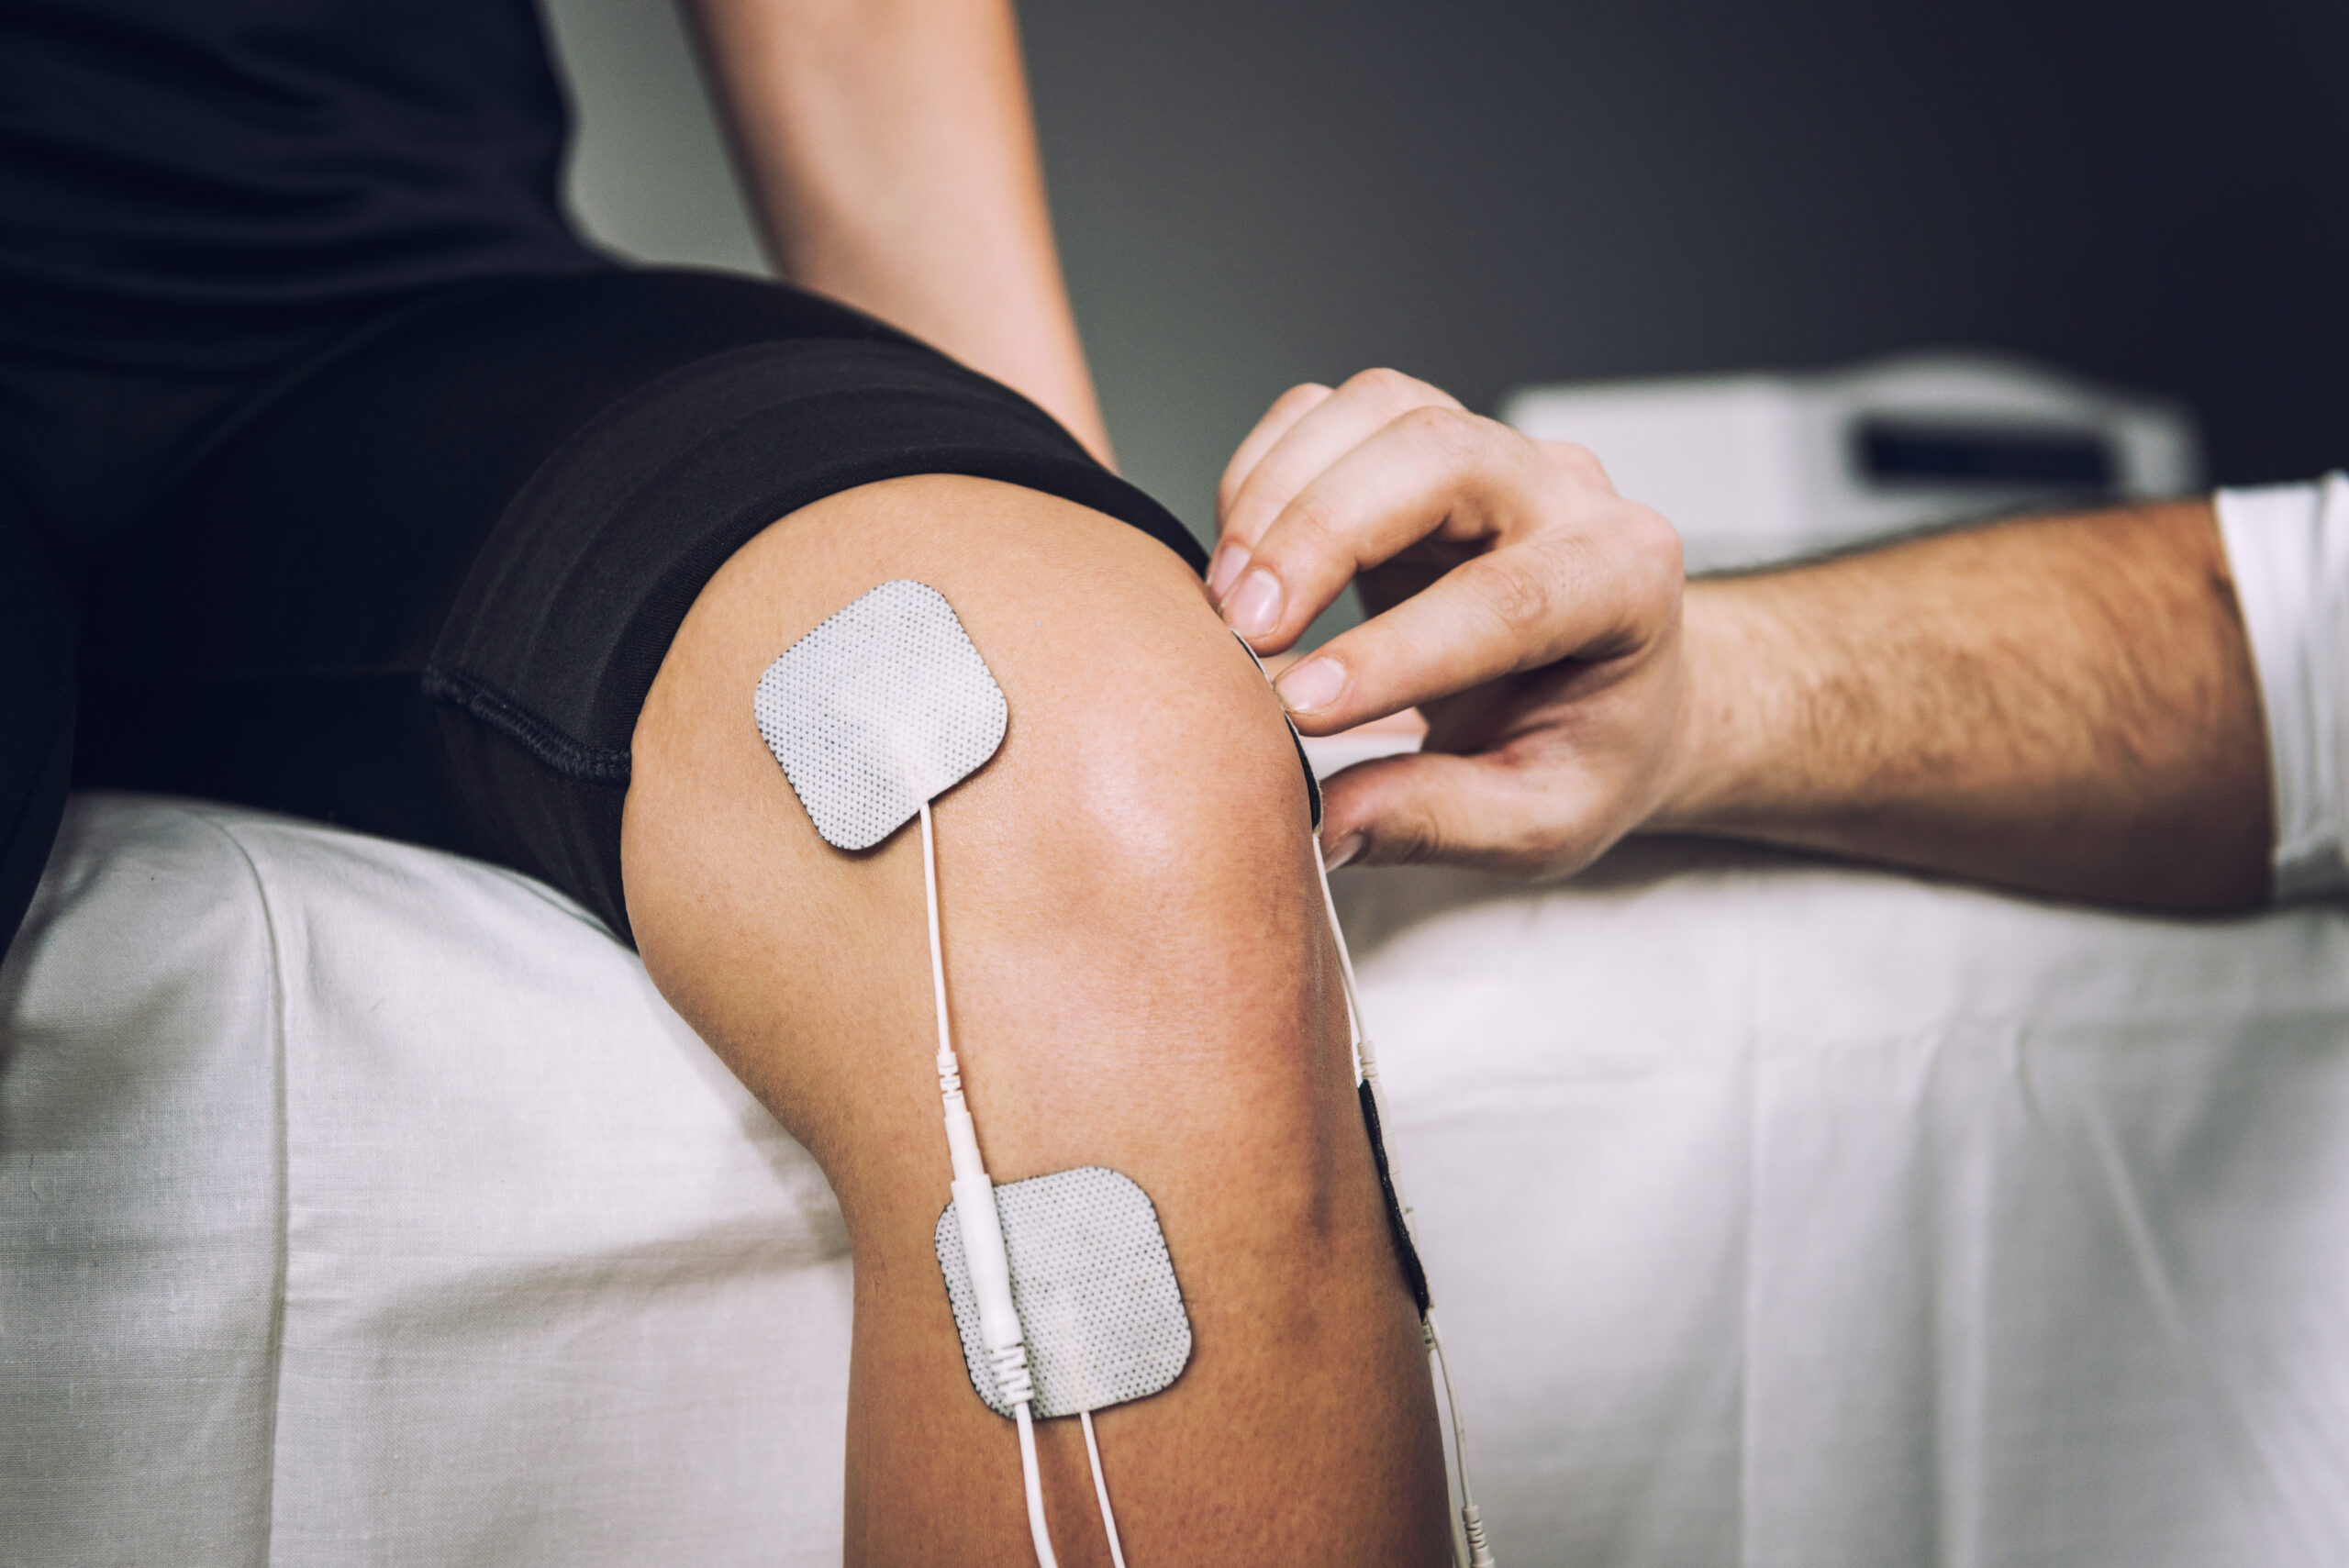 Electrodes of tens device on knee